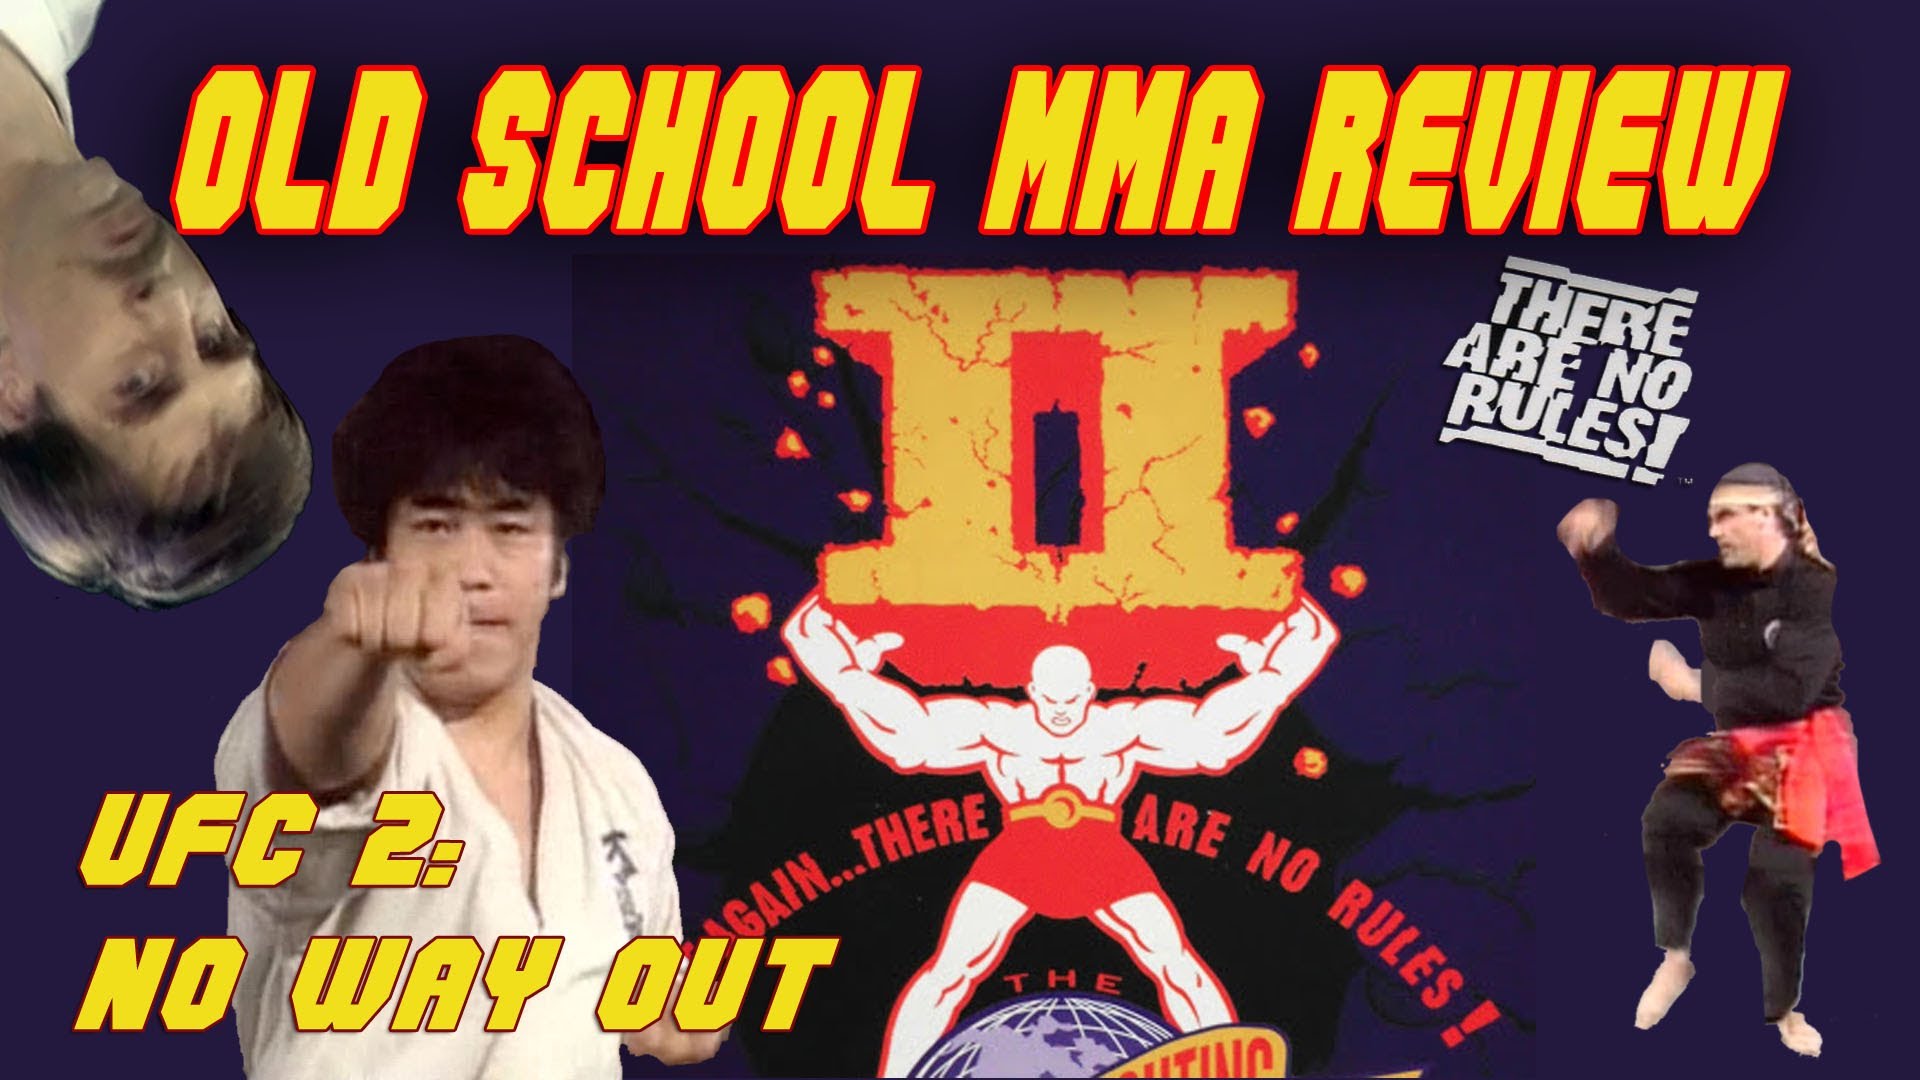 Old School MMA Review: UFC 2 MMA Video1920 x 1080